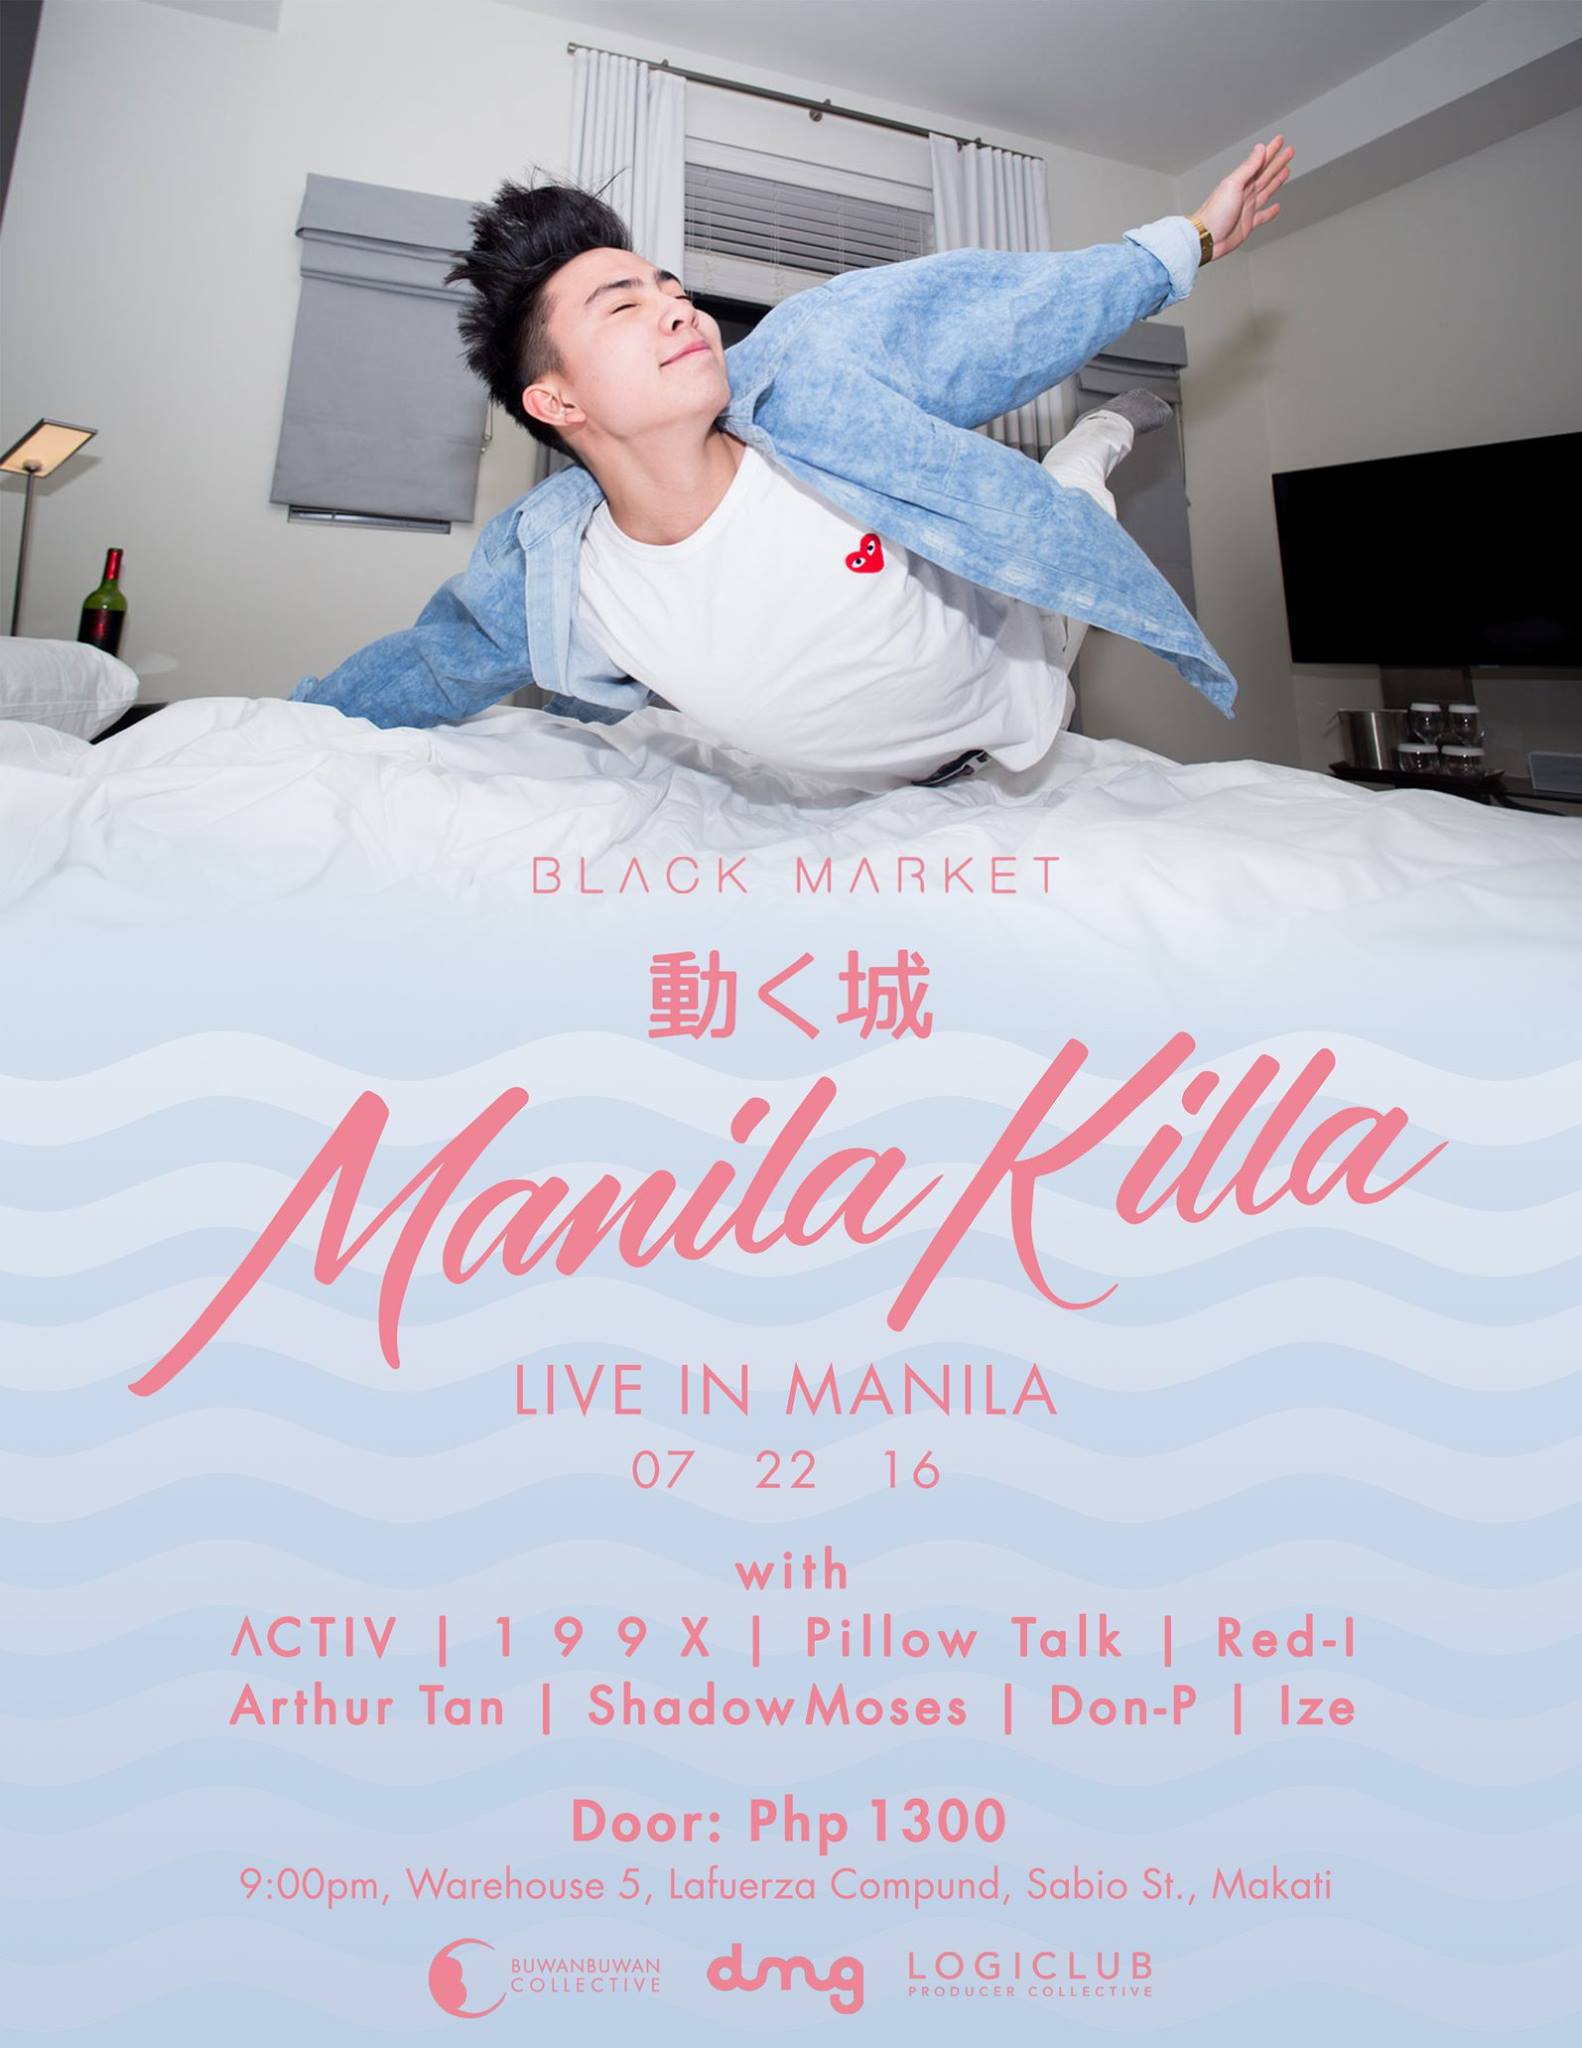 Manila Killa Live in Manila Hosted by Black Market clock Today at 9 PM Happening Now · 79° Mostly Cloudy pin Show Map Black Market WAREHOUSE 5, LA FUERZA COMPOUND 2, SABIO ST., Makati, Philippines About Discussion Write Post Add Photo / Video Create Poll Details • MANILA KILLA (USA) • Born in the Philippines but based out of Washington, DC, Manila Killa has been producing since middle school when he first started toying around on GarageBand in late 2009 after moving back home to the Philippines. Previously, he was just interested in dance music and the culture that lied beneath it; however, he admits that moving back to his homeland shaped his view on the culture, and future vision of how music could be made. His interest in production grew quickly as his friends presented him an influx of so many different genres. His taste and passion for music as a whole has prepared him to understand what people want to hear in any kind of setting, as his diverse track roster has proved him worthy of understanding many genres of dance music. Fast-forward to moving back to the United States. Manila Killa began focusing on tuning his skills as a DJ and producer. It wasn't until he released a remix of Deadmau5's "Strobe" that he knew being a producer could be a career choice, as Afrojack and a few other big names started using it in festival sets. It wasn't until 2014, though, that he focused his attention on taking his career to the next level: he started the now-super duo, Hotel Garuda, with his good friend Candleweather, as well as starting the Moving Castle Collective with AObeats, Robokid and Hunt for the Breeze, which has gained support from the likes of Benzi, Diplo, Cashmere Cat, Goldroom, Kygo Nina Las Vegas, and Trippy Turtle. DOOR CHARGE: Php 1300 LIMITED pre-sale tickets will be available for Php 700 at BadDecisionsWed 7.13.16: Kouta Kutsuma, Gavin Skewes with BD Residents | Mao Den: Bastard Fore